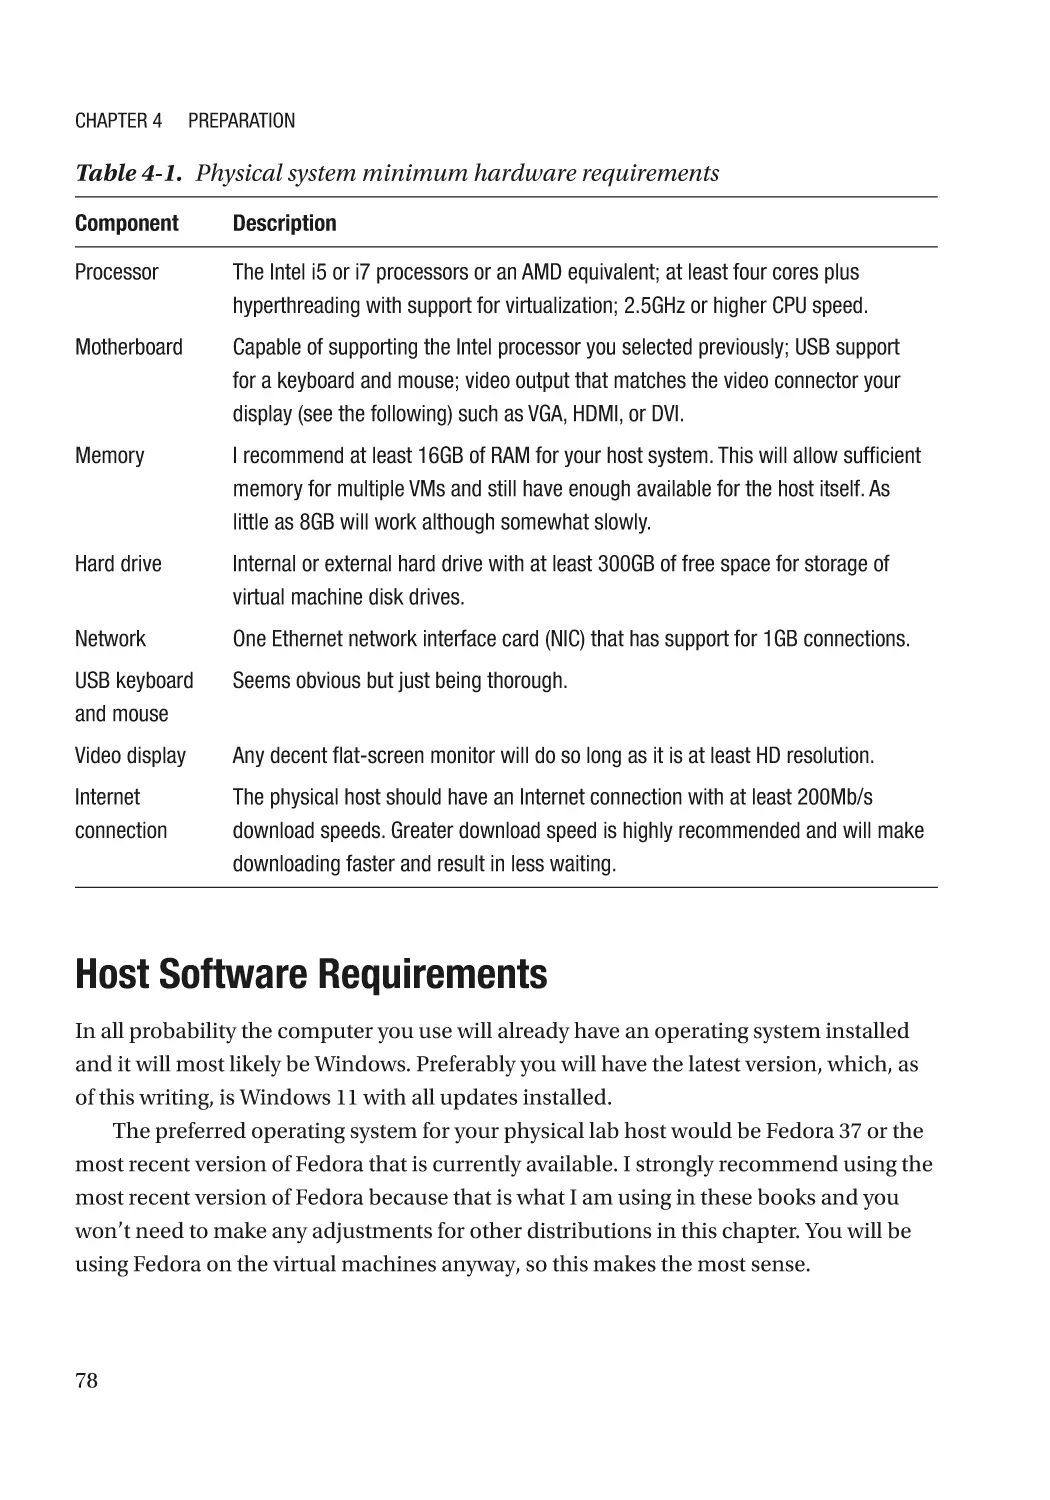 Host Software Requirements